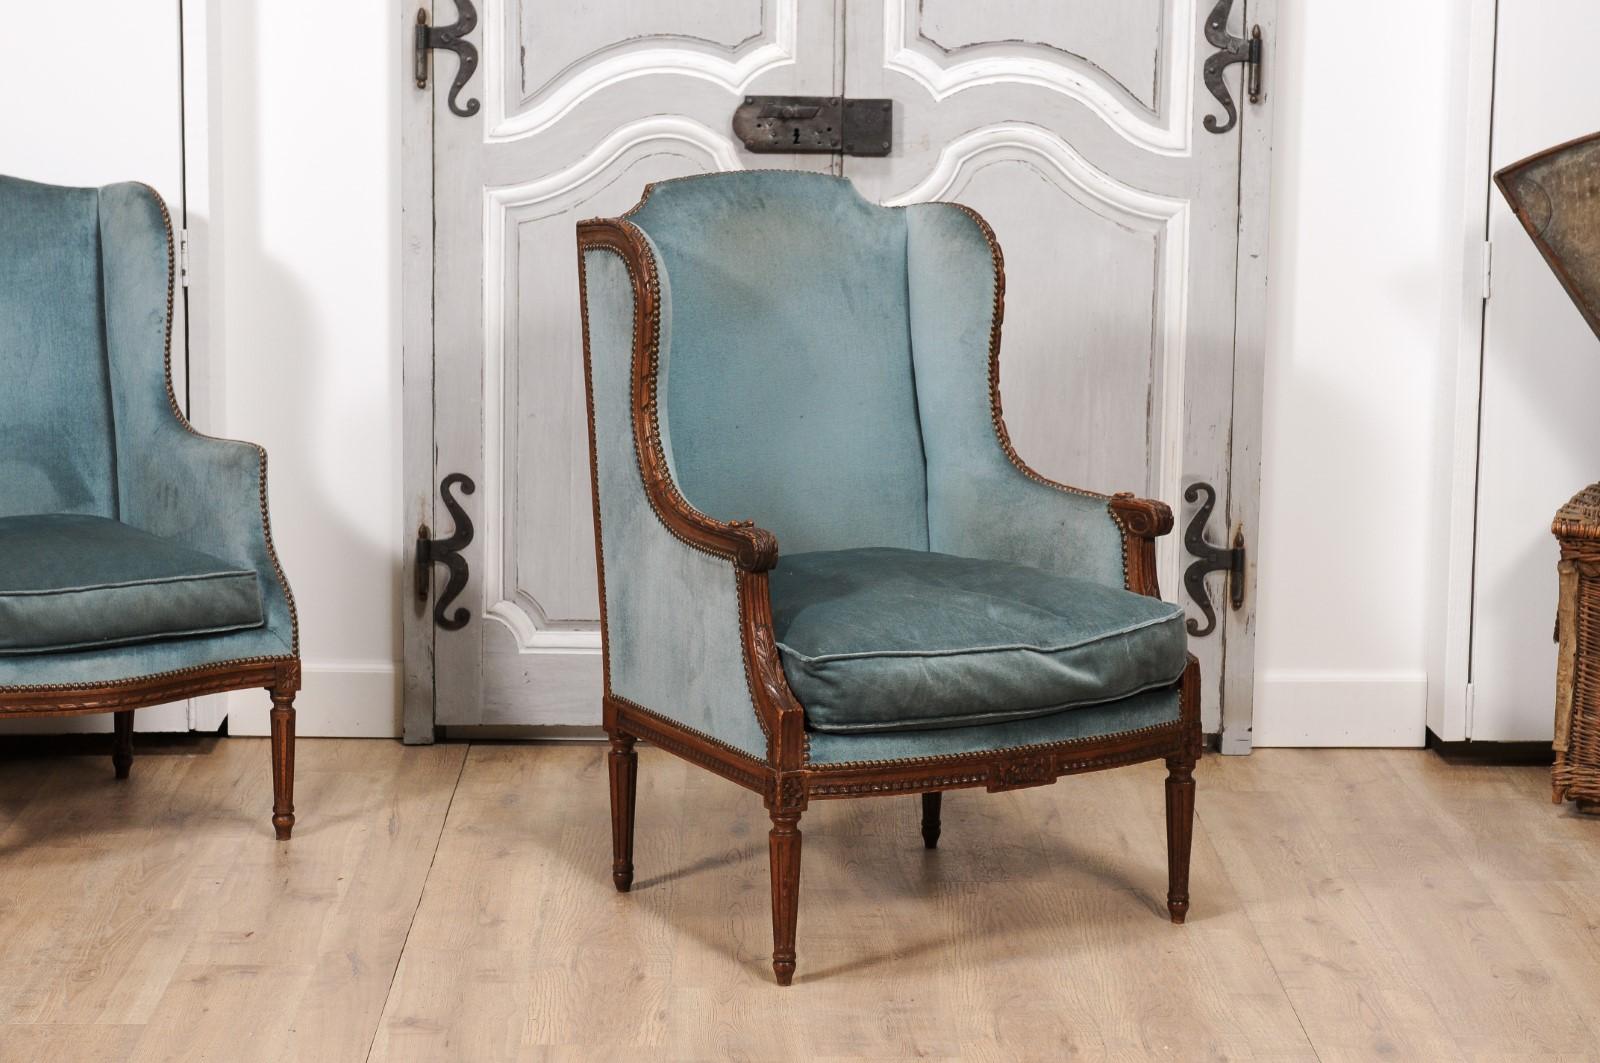 A large French Louis XVI style walnut wingback bergère chair from the 19th century with carved foliage décor and old blue velvet upholstery. Introducing a French Louis XVI style bergère chair, dated to the 19th century, imbued with a rich historical